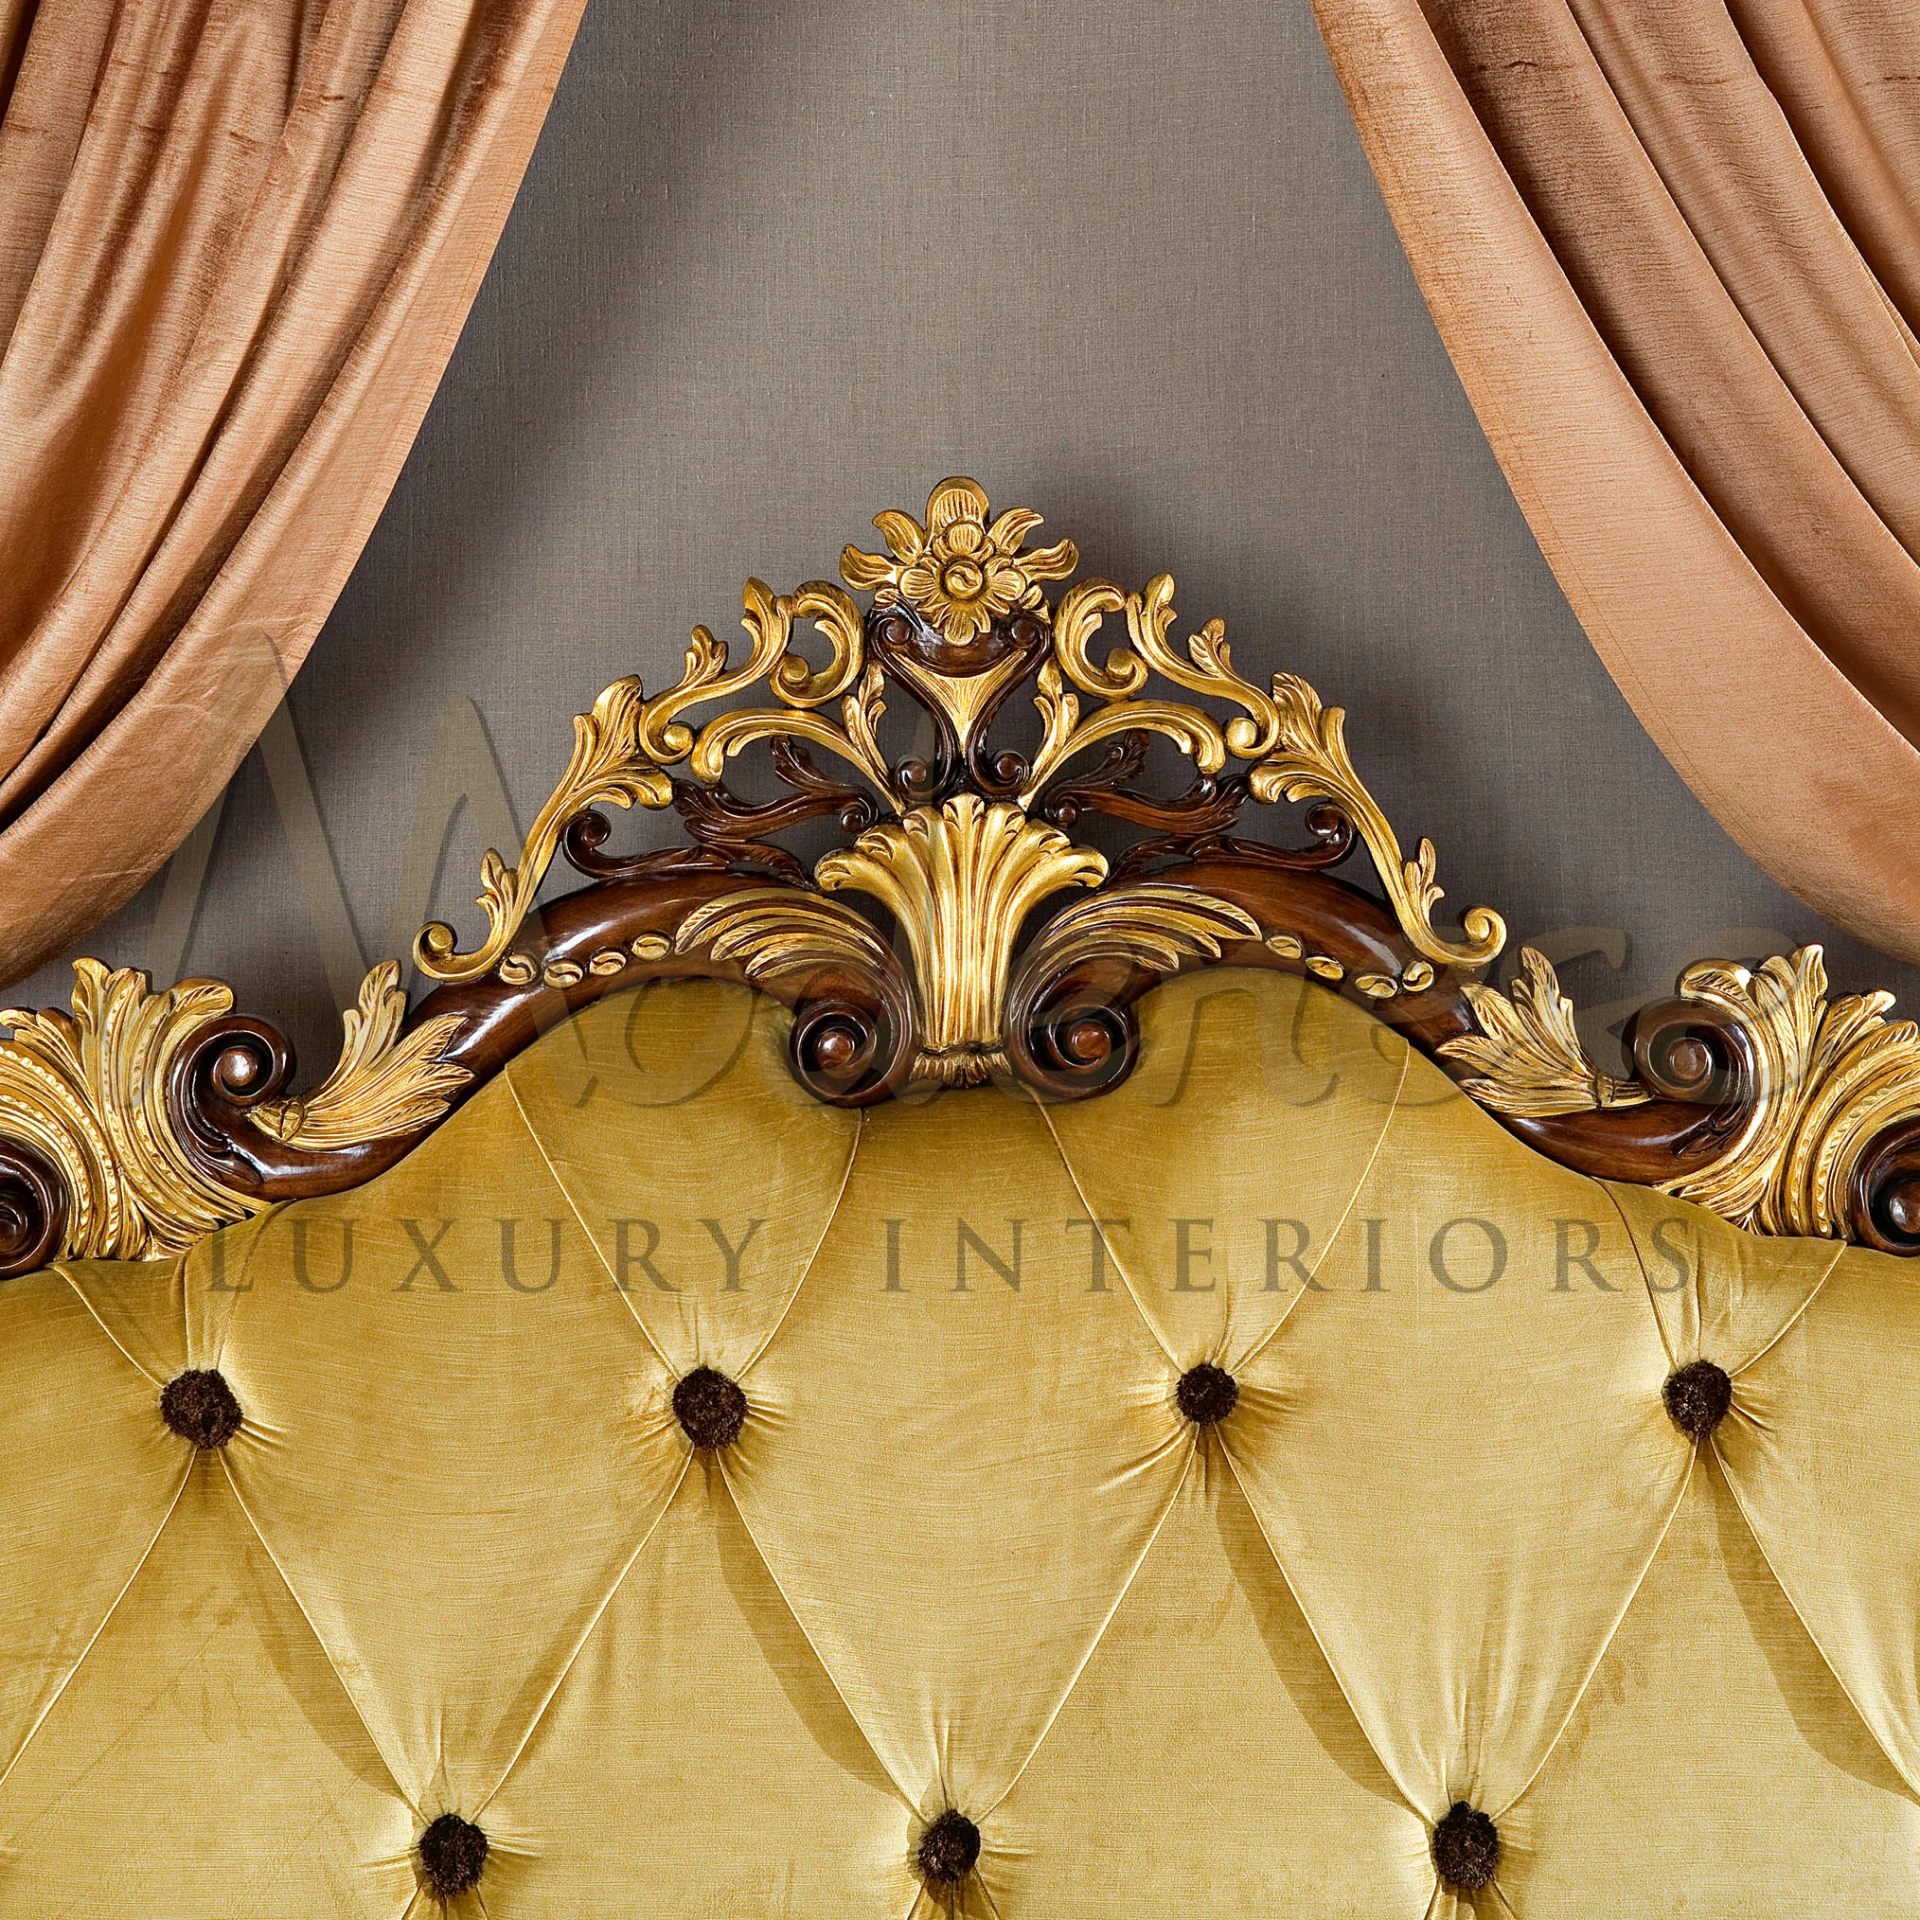 A close-up of a bed's golden tufted headboard from Modenese Furniture with dark wood and intricate gold leaf carvings, flanked by elegant beige curtains.